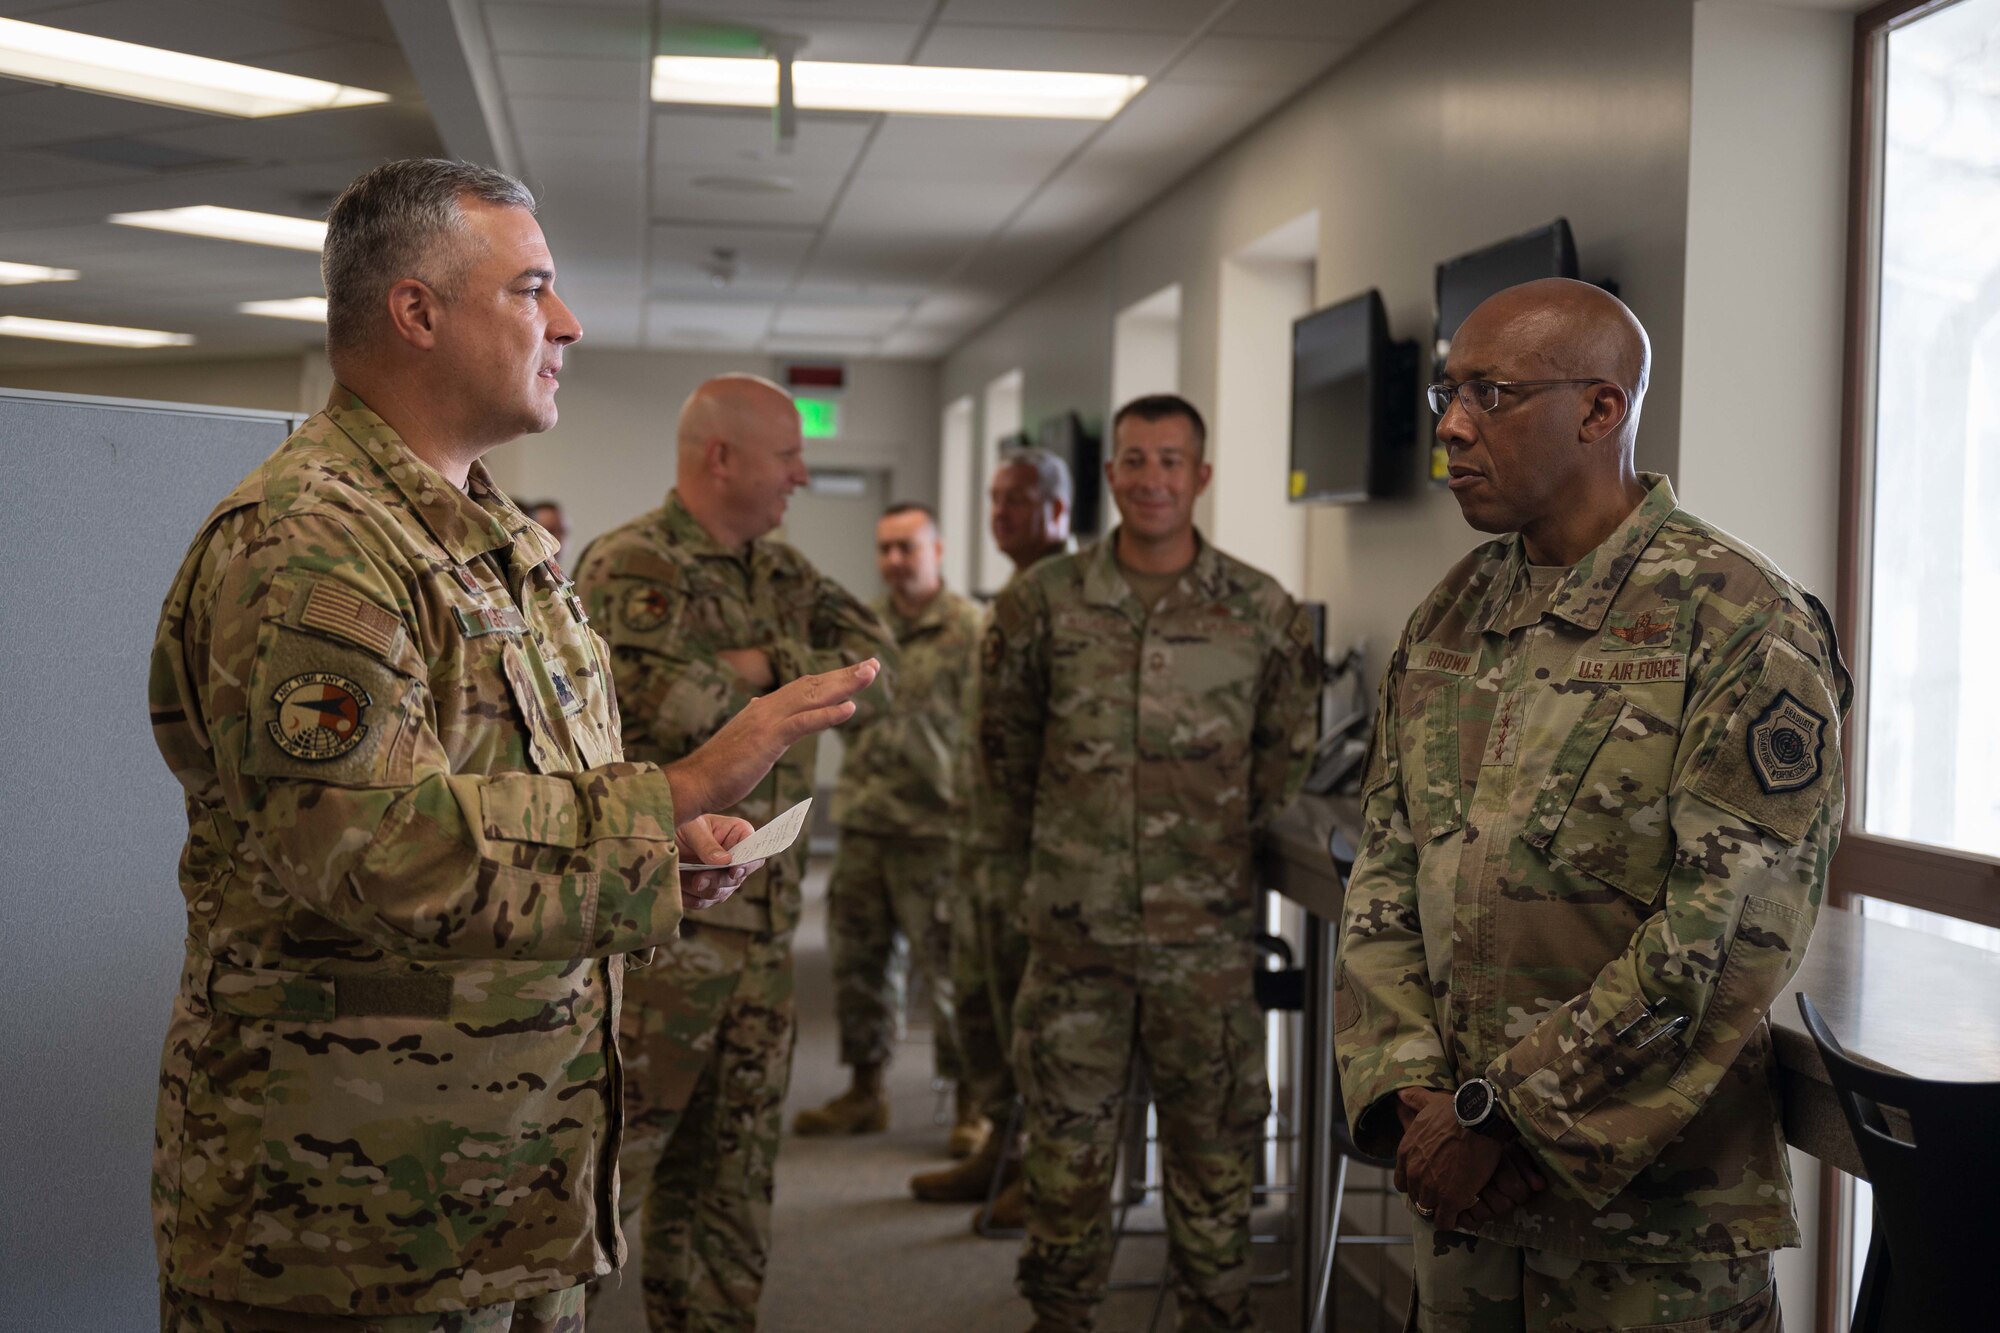 U.S. Air Force Chief of Staff Gen. CQ Brown, Jr. talks with Tanker Task Force leadership about a new hangar finished earlier this year and the importance of strong international partnerships at Andersen Air Force Base, Guam, Aug. 7, 2022.